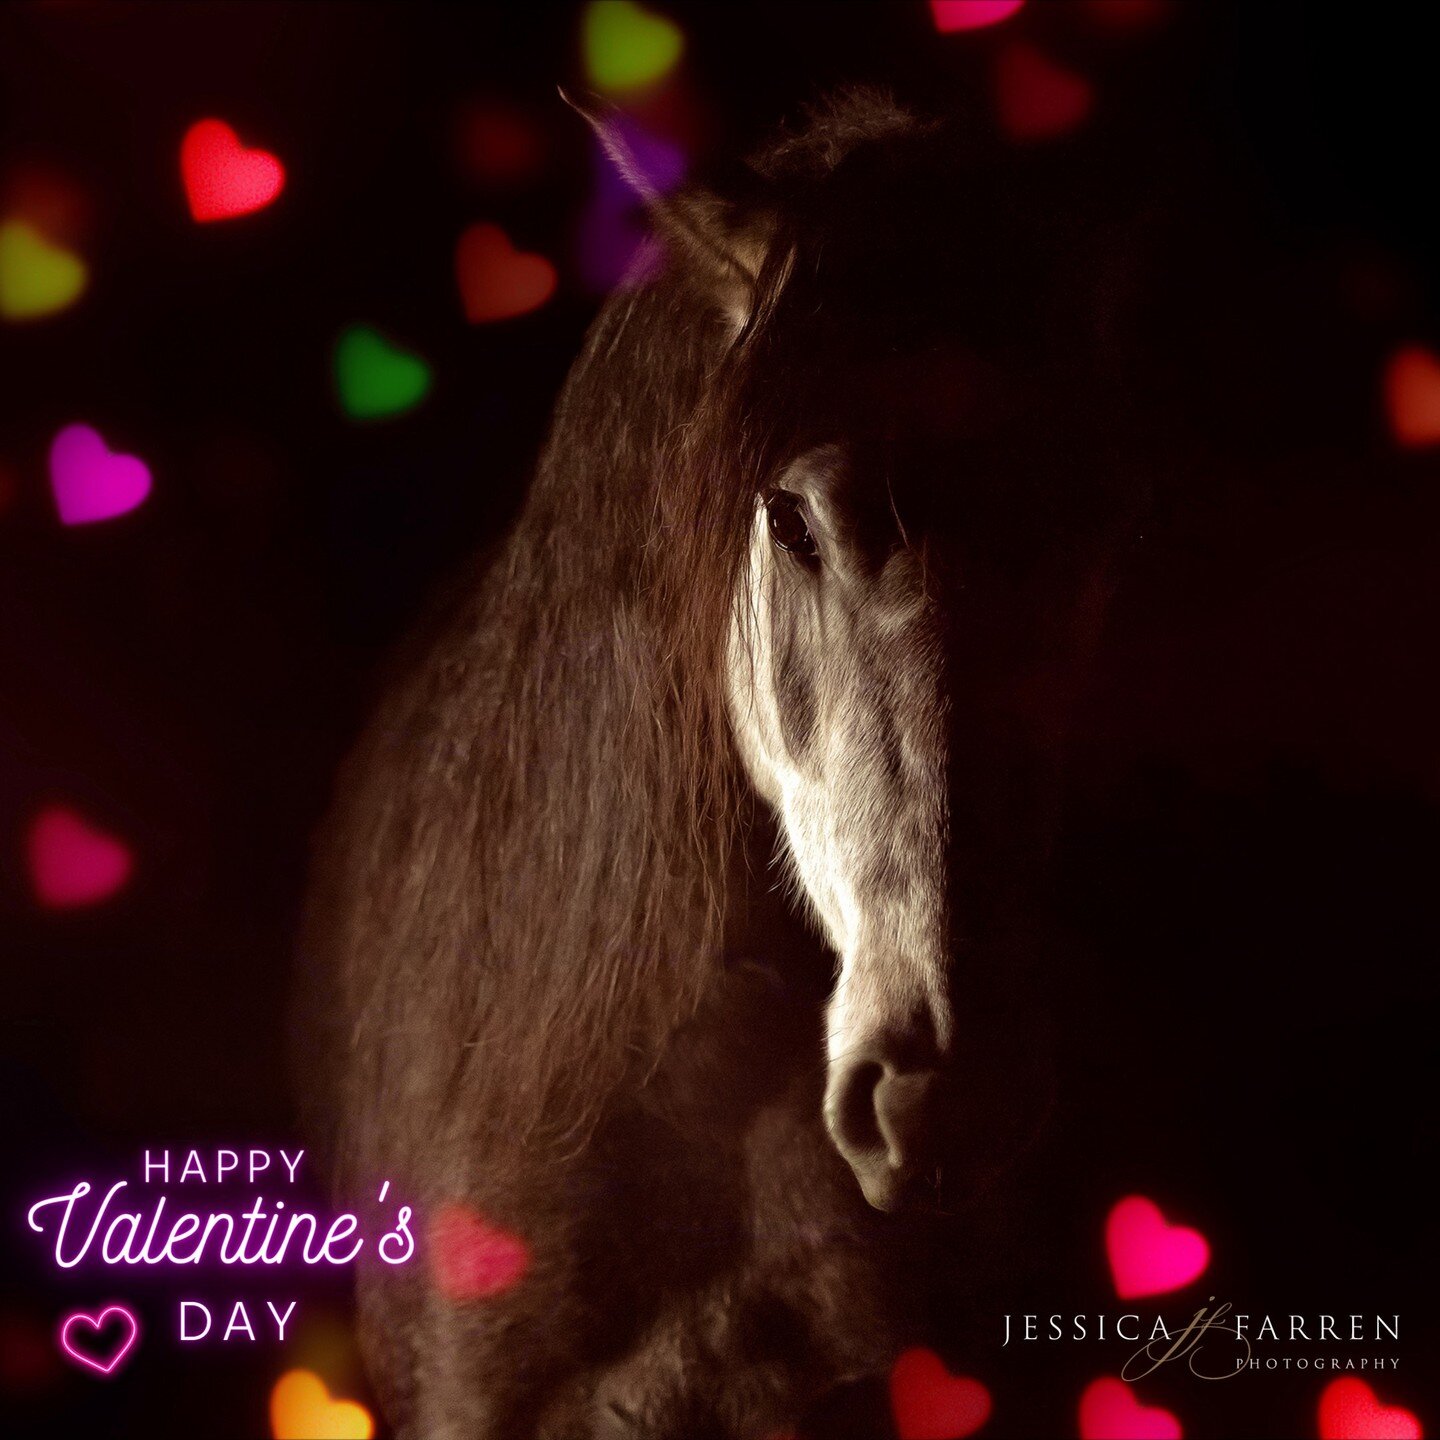 Happy Valentine's Day!!💕
Pic is of the gorgeous Lusitano mare Oitava from our nighttime photoshoot with @jchorsetraining 
.
.
.
#fineartphotographer #jchorsetraining #equinephotographer #lusitano #lusitanomare #equineportrait #equestrianphotographer